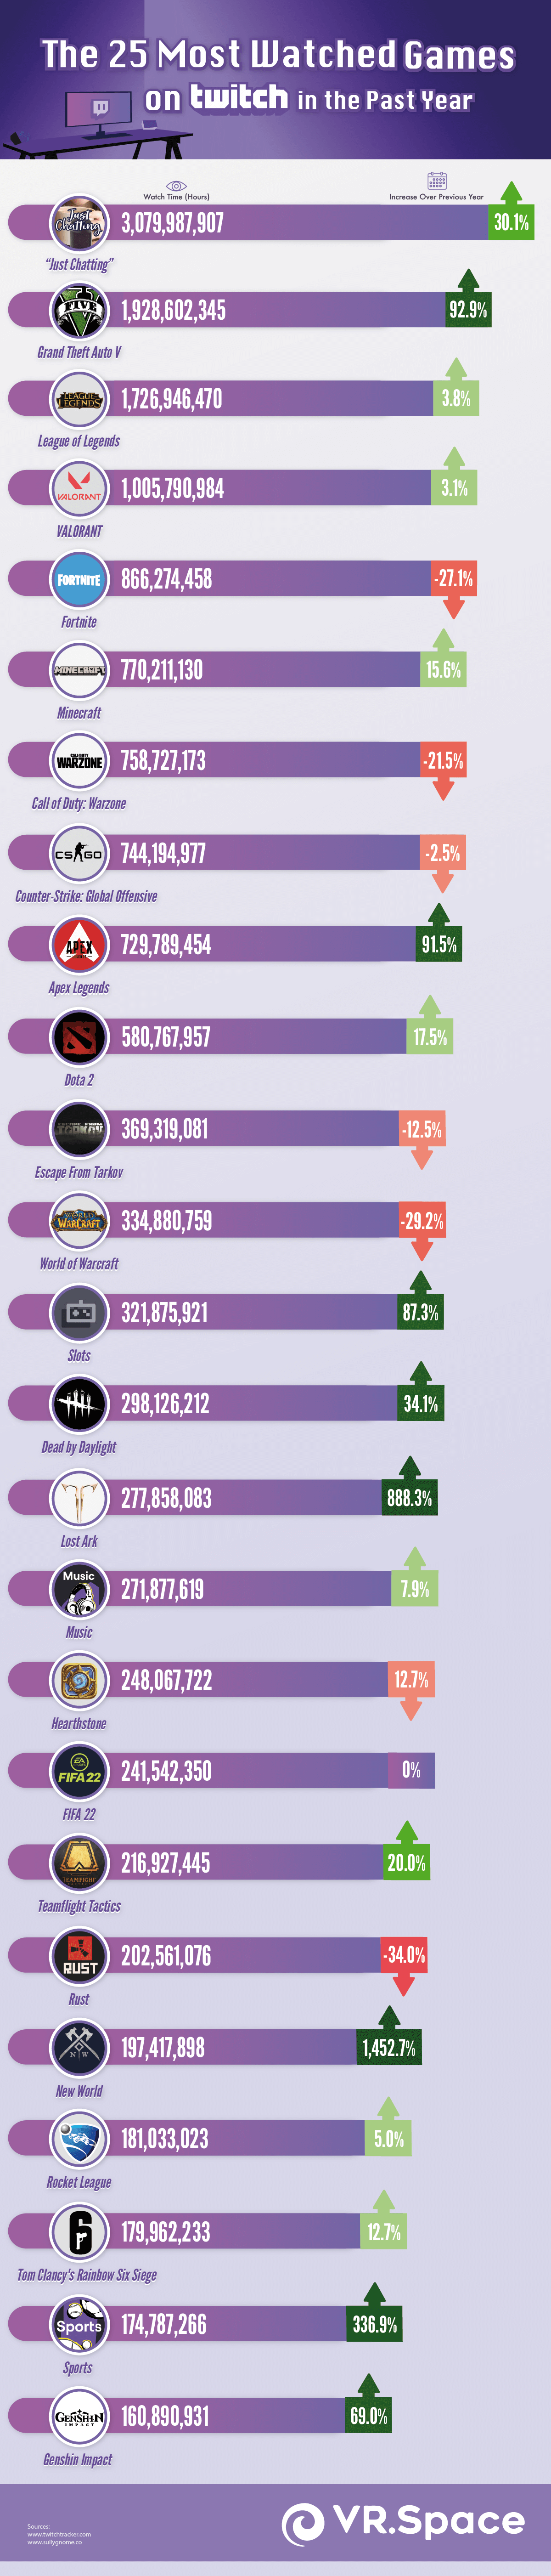 most-watched-games-twitch-3_c